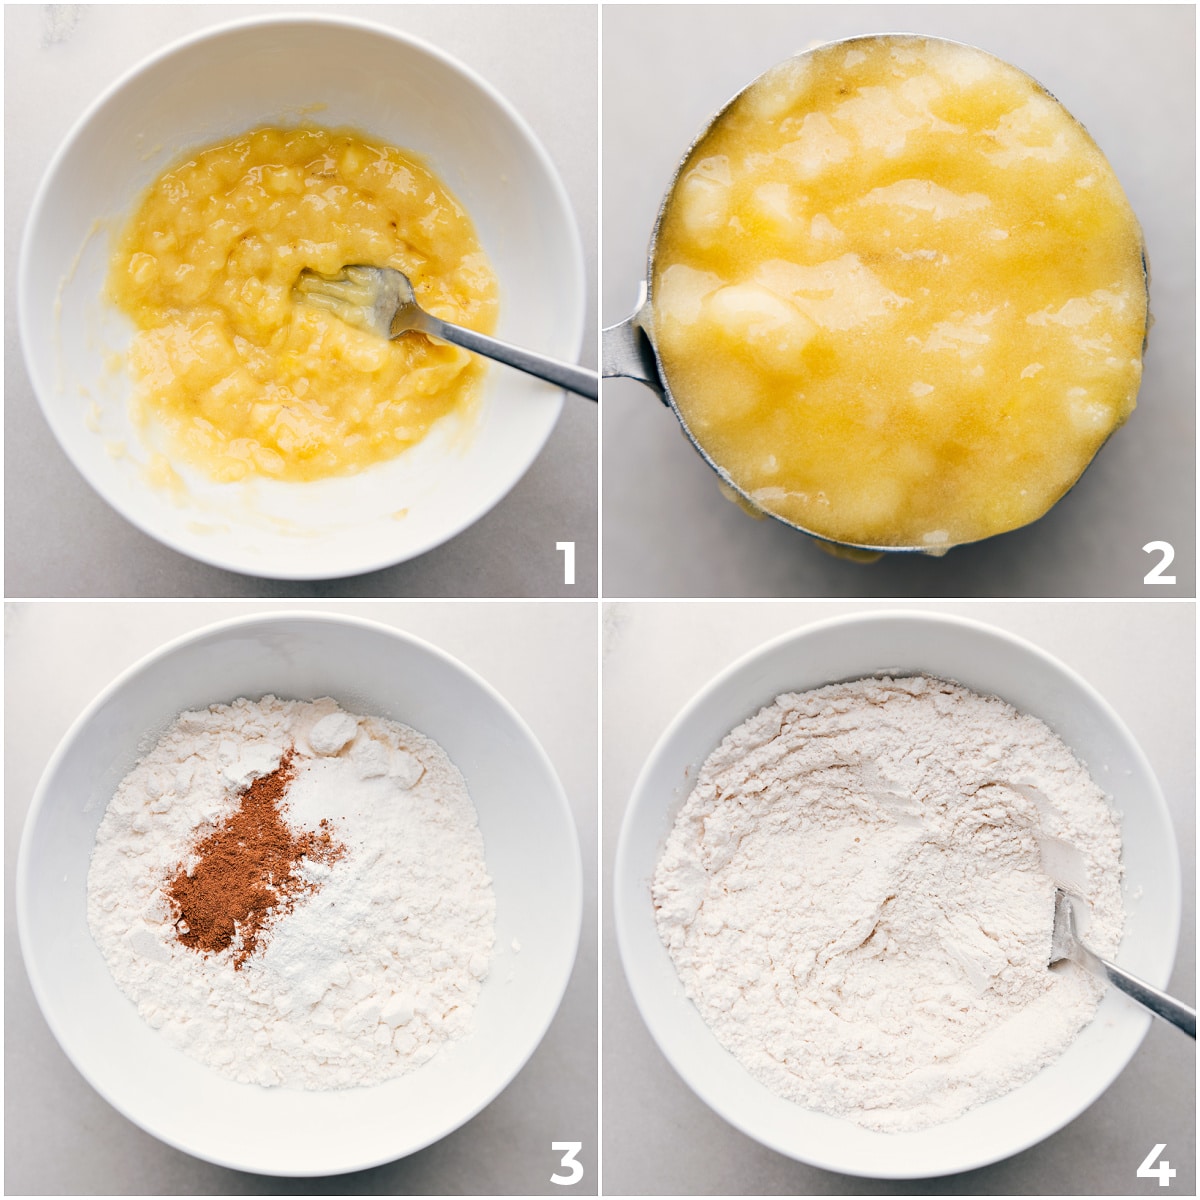 The banana being mashed and measured and all the dry ingredients in a bowl for this banana pancake recipe.